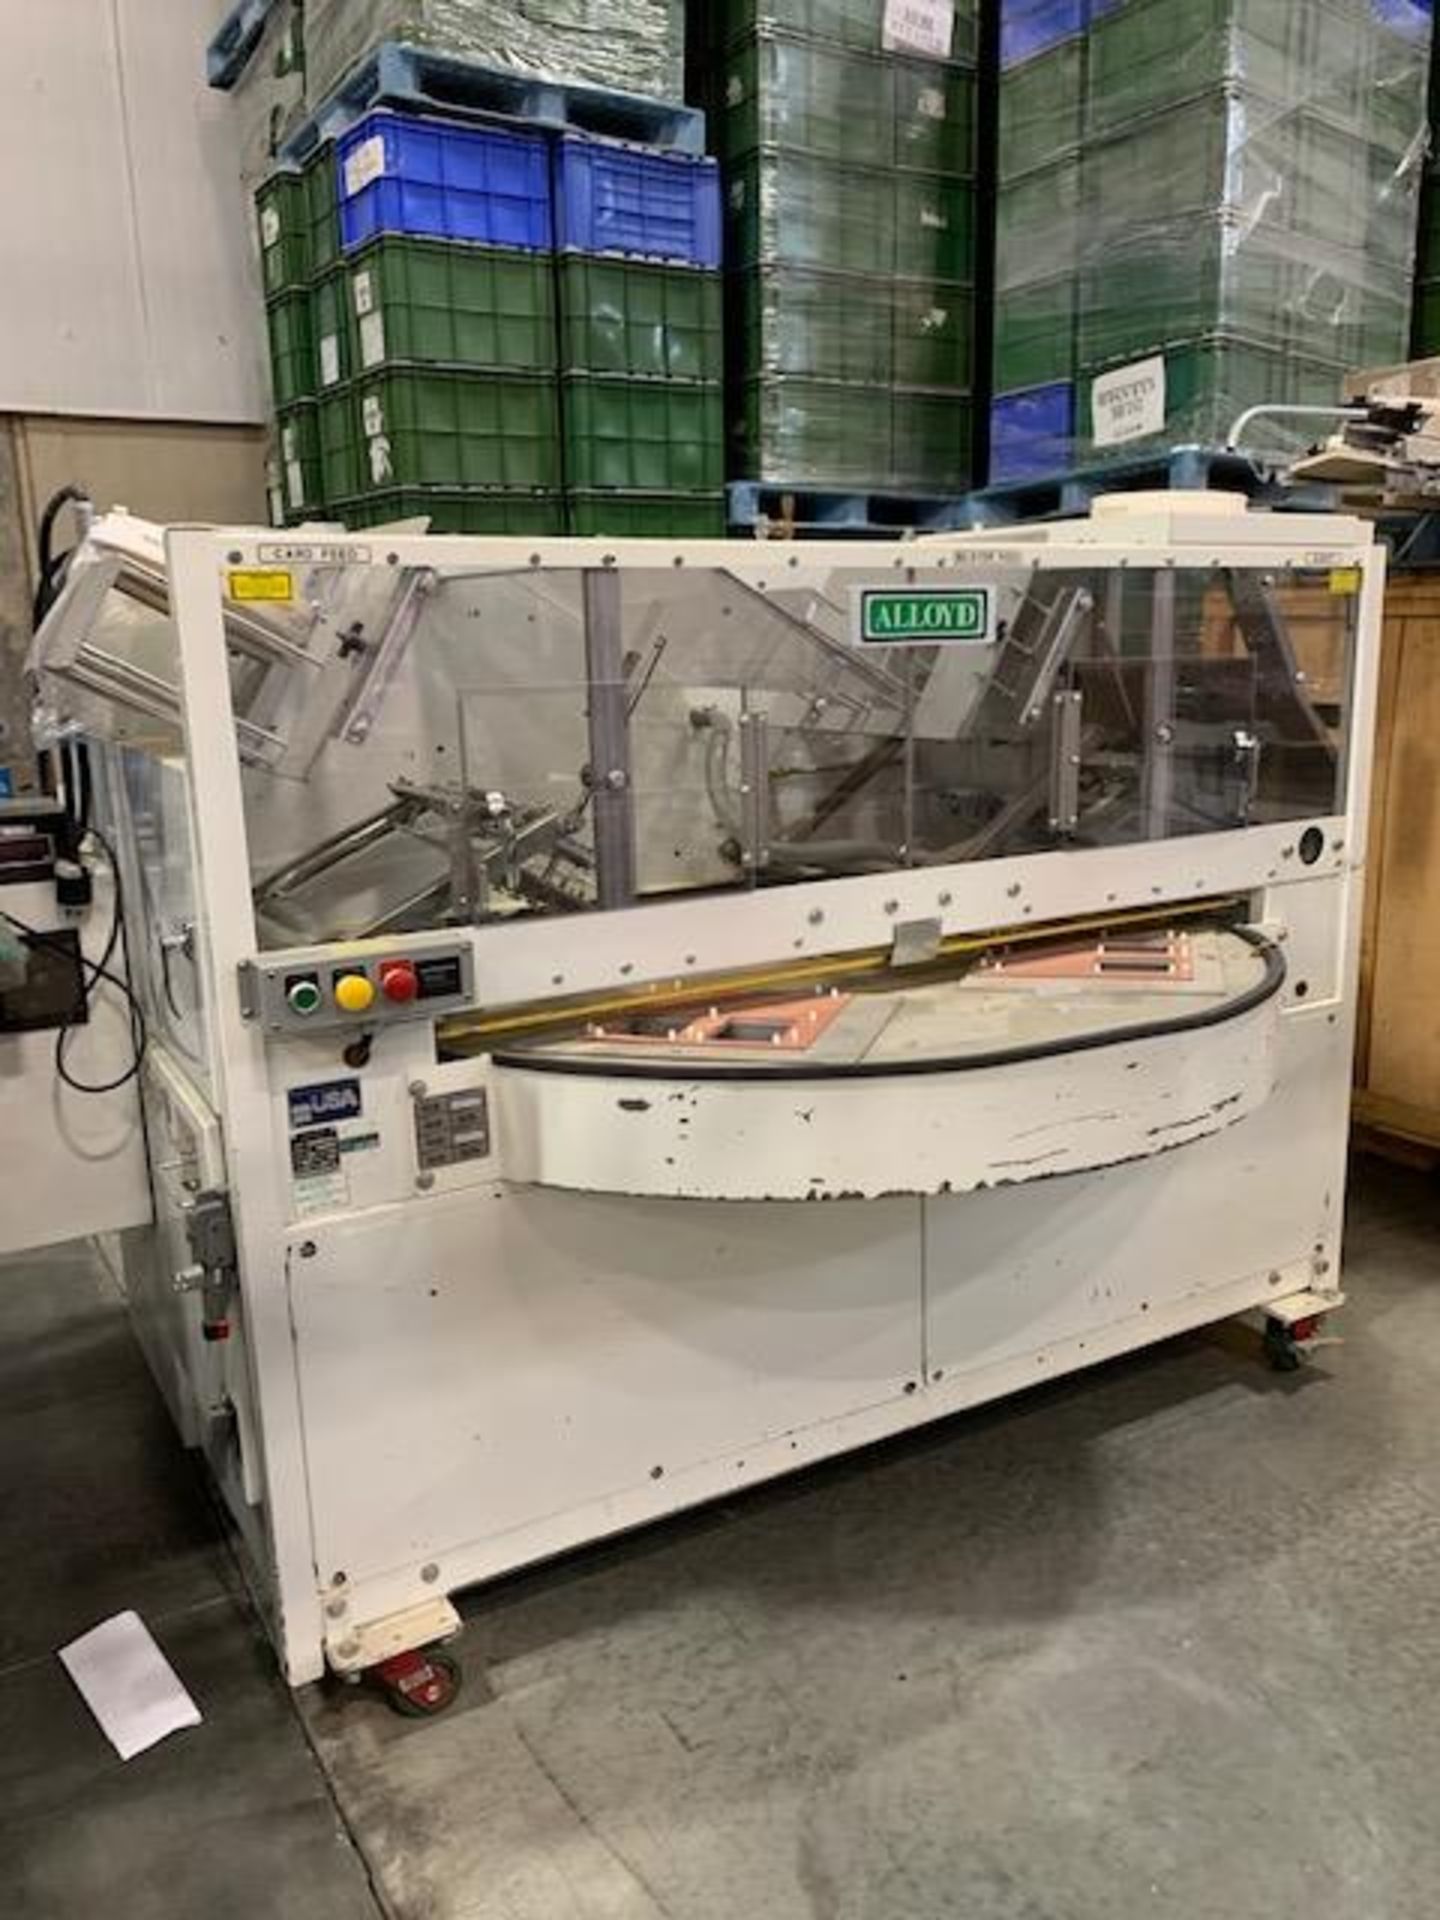 Alloyd model 4SC1216 4-station rotary blister packager with Blister and Card feeds, Becker Vacuum